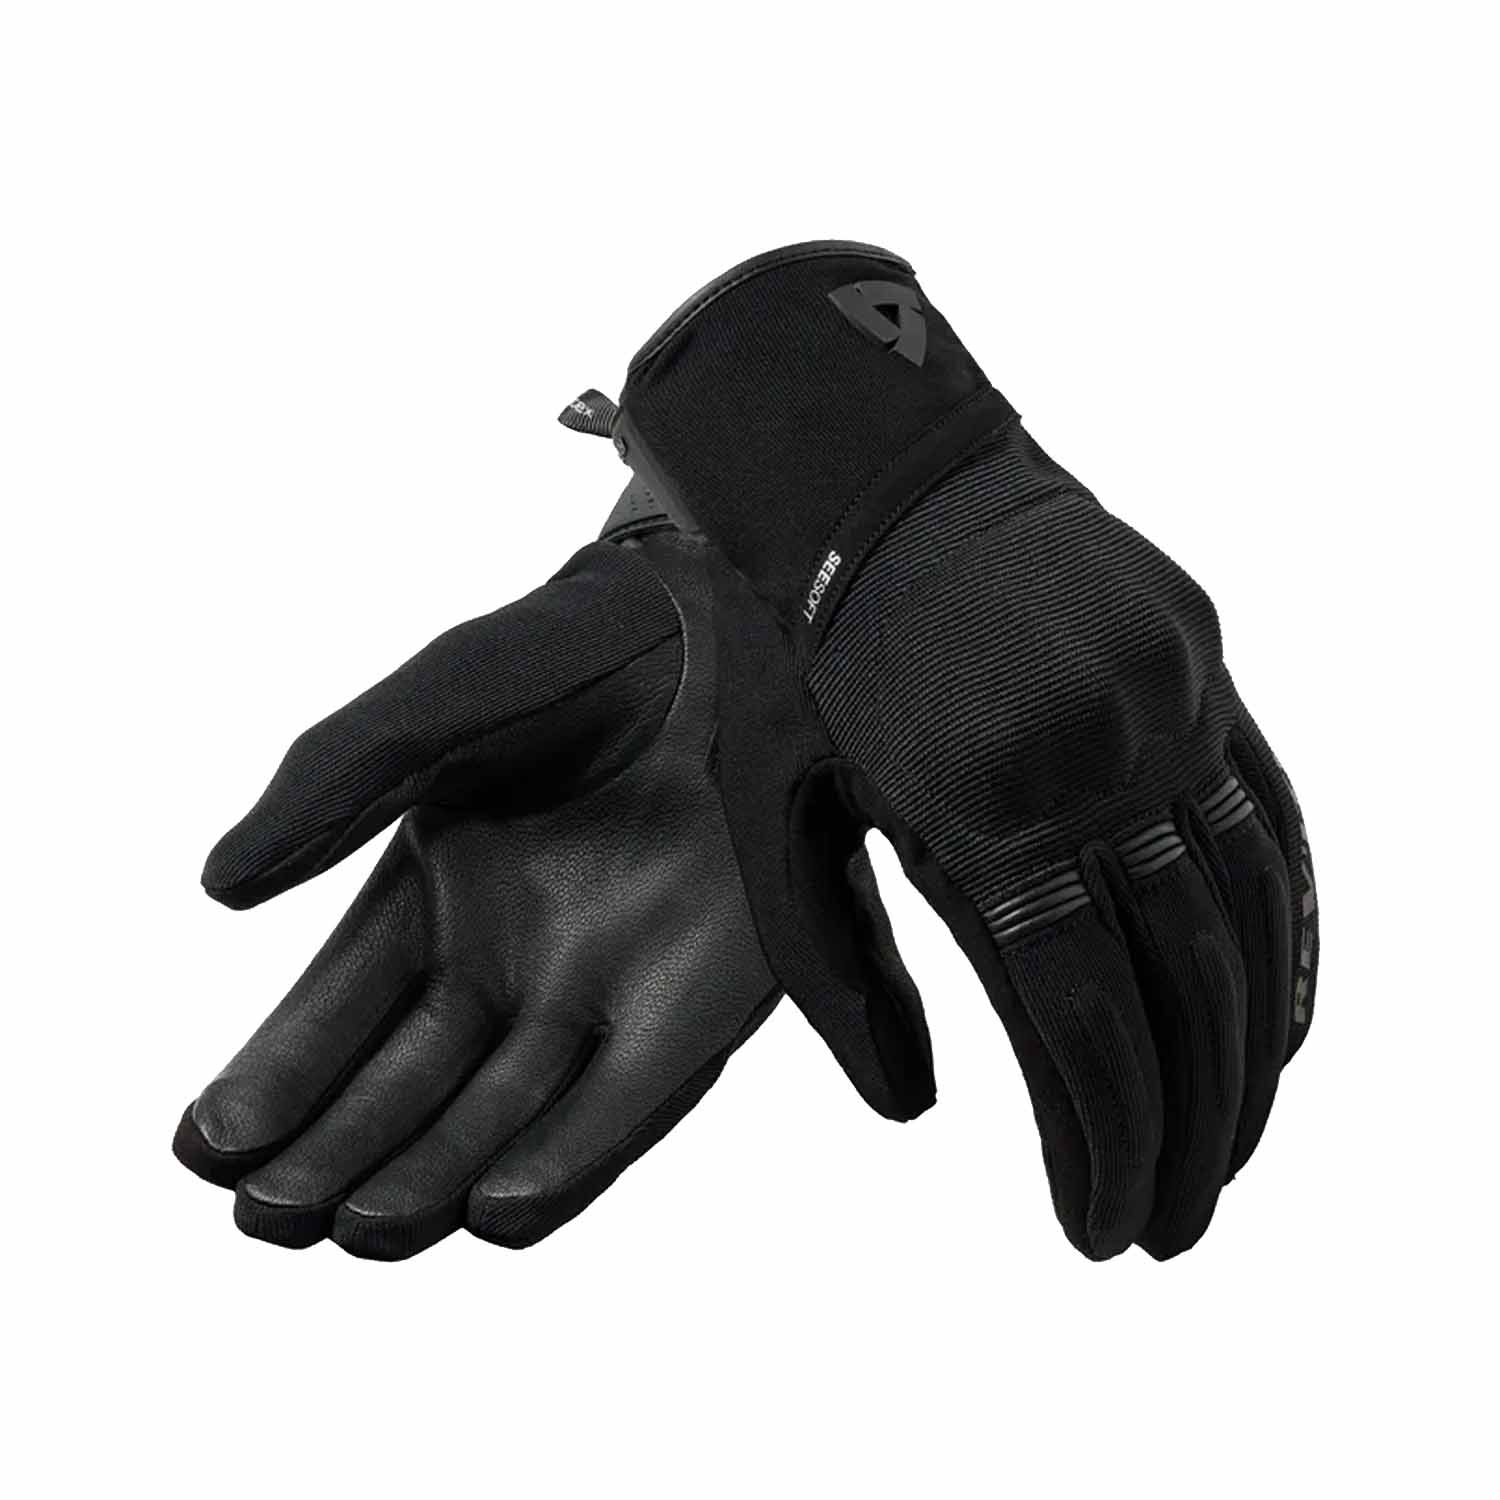 Image of REV'IT! Mosca 2 H2O Gloves Ladies Black Size XS ID 8700001378055